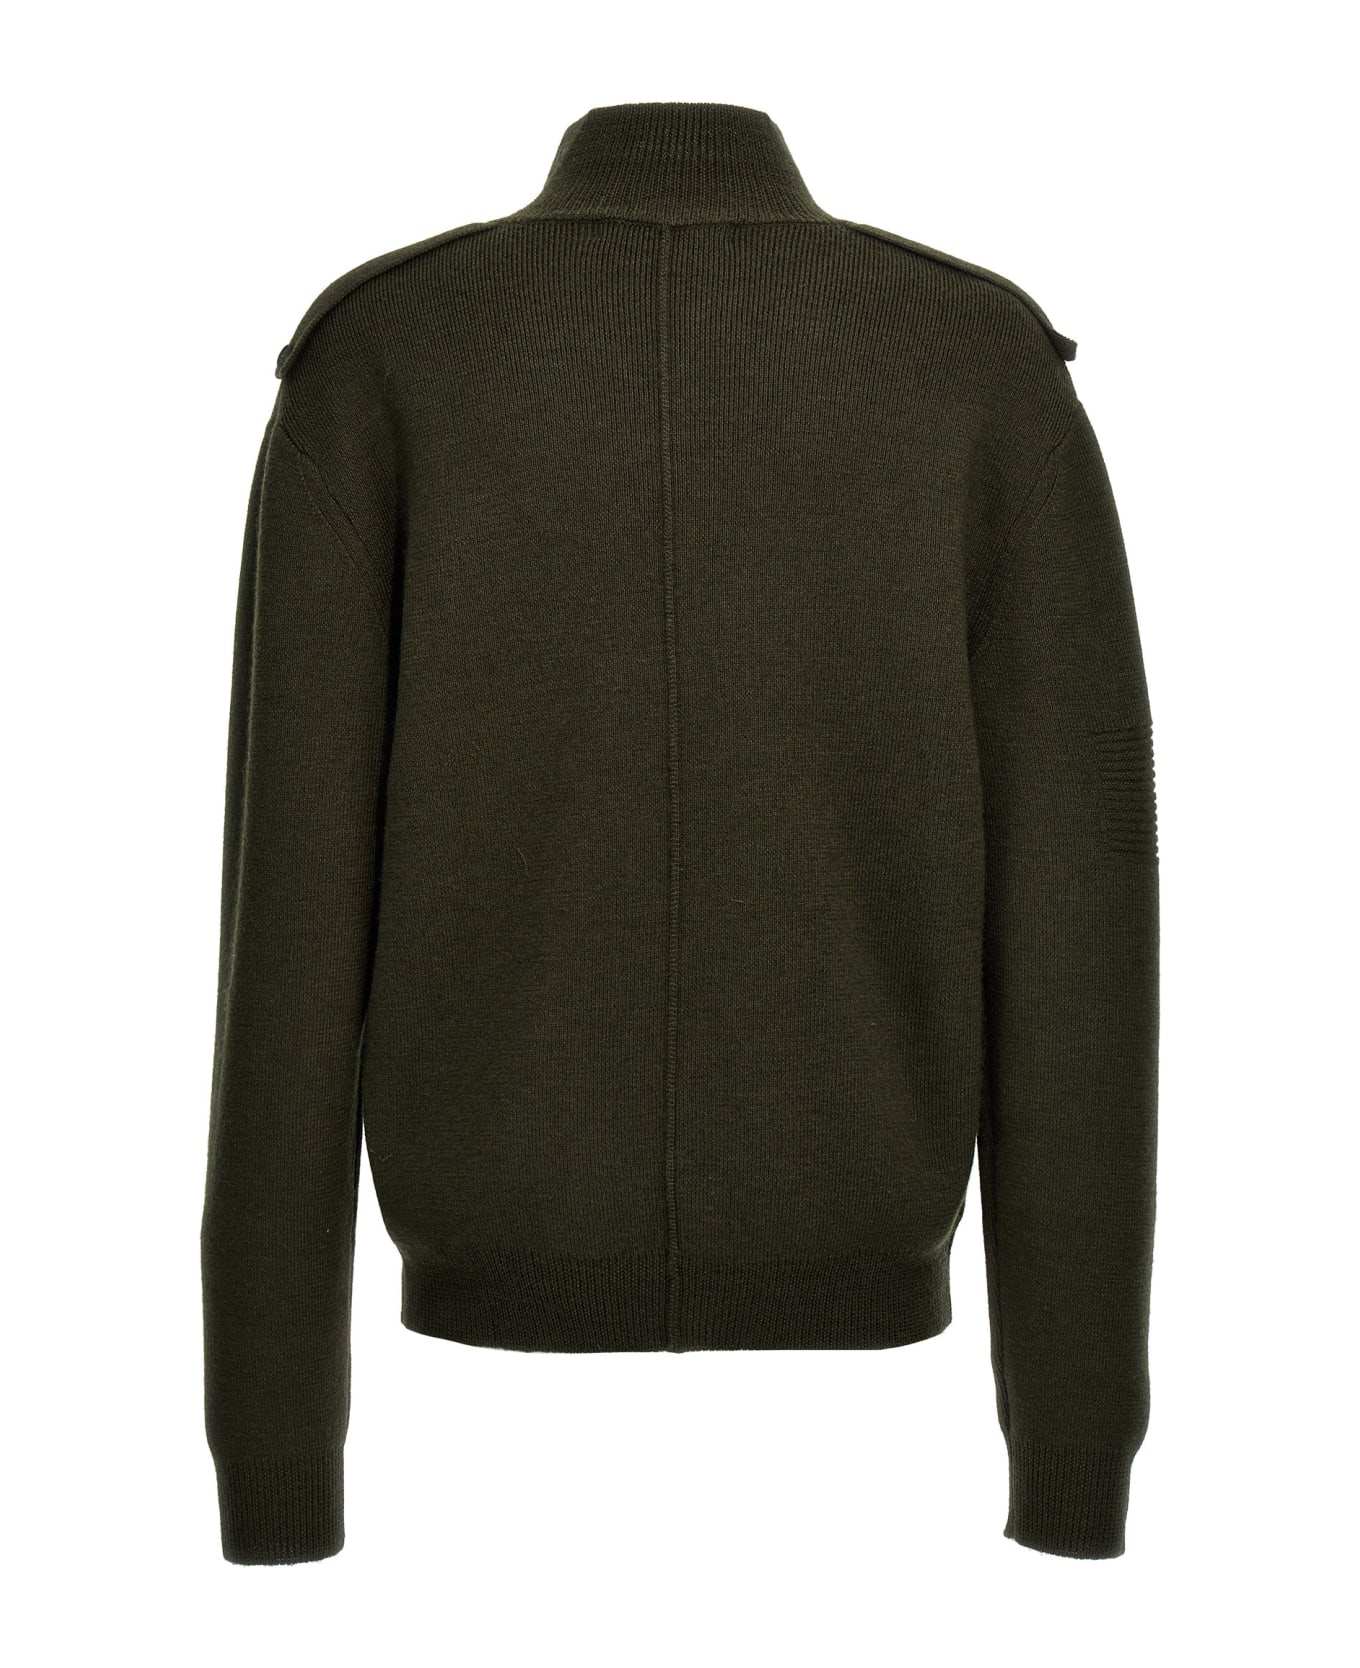 A-COLD-WALL 'utility' Sweater - Green